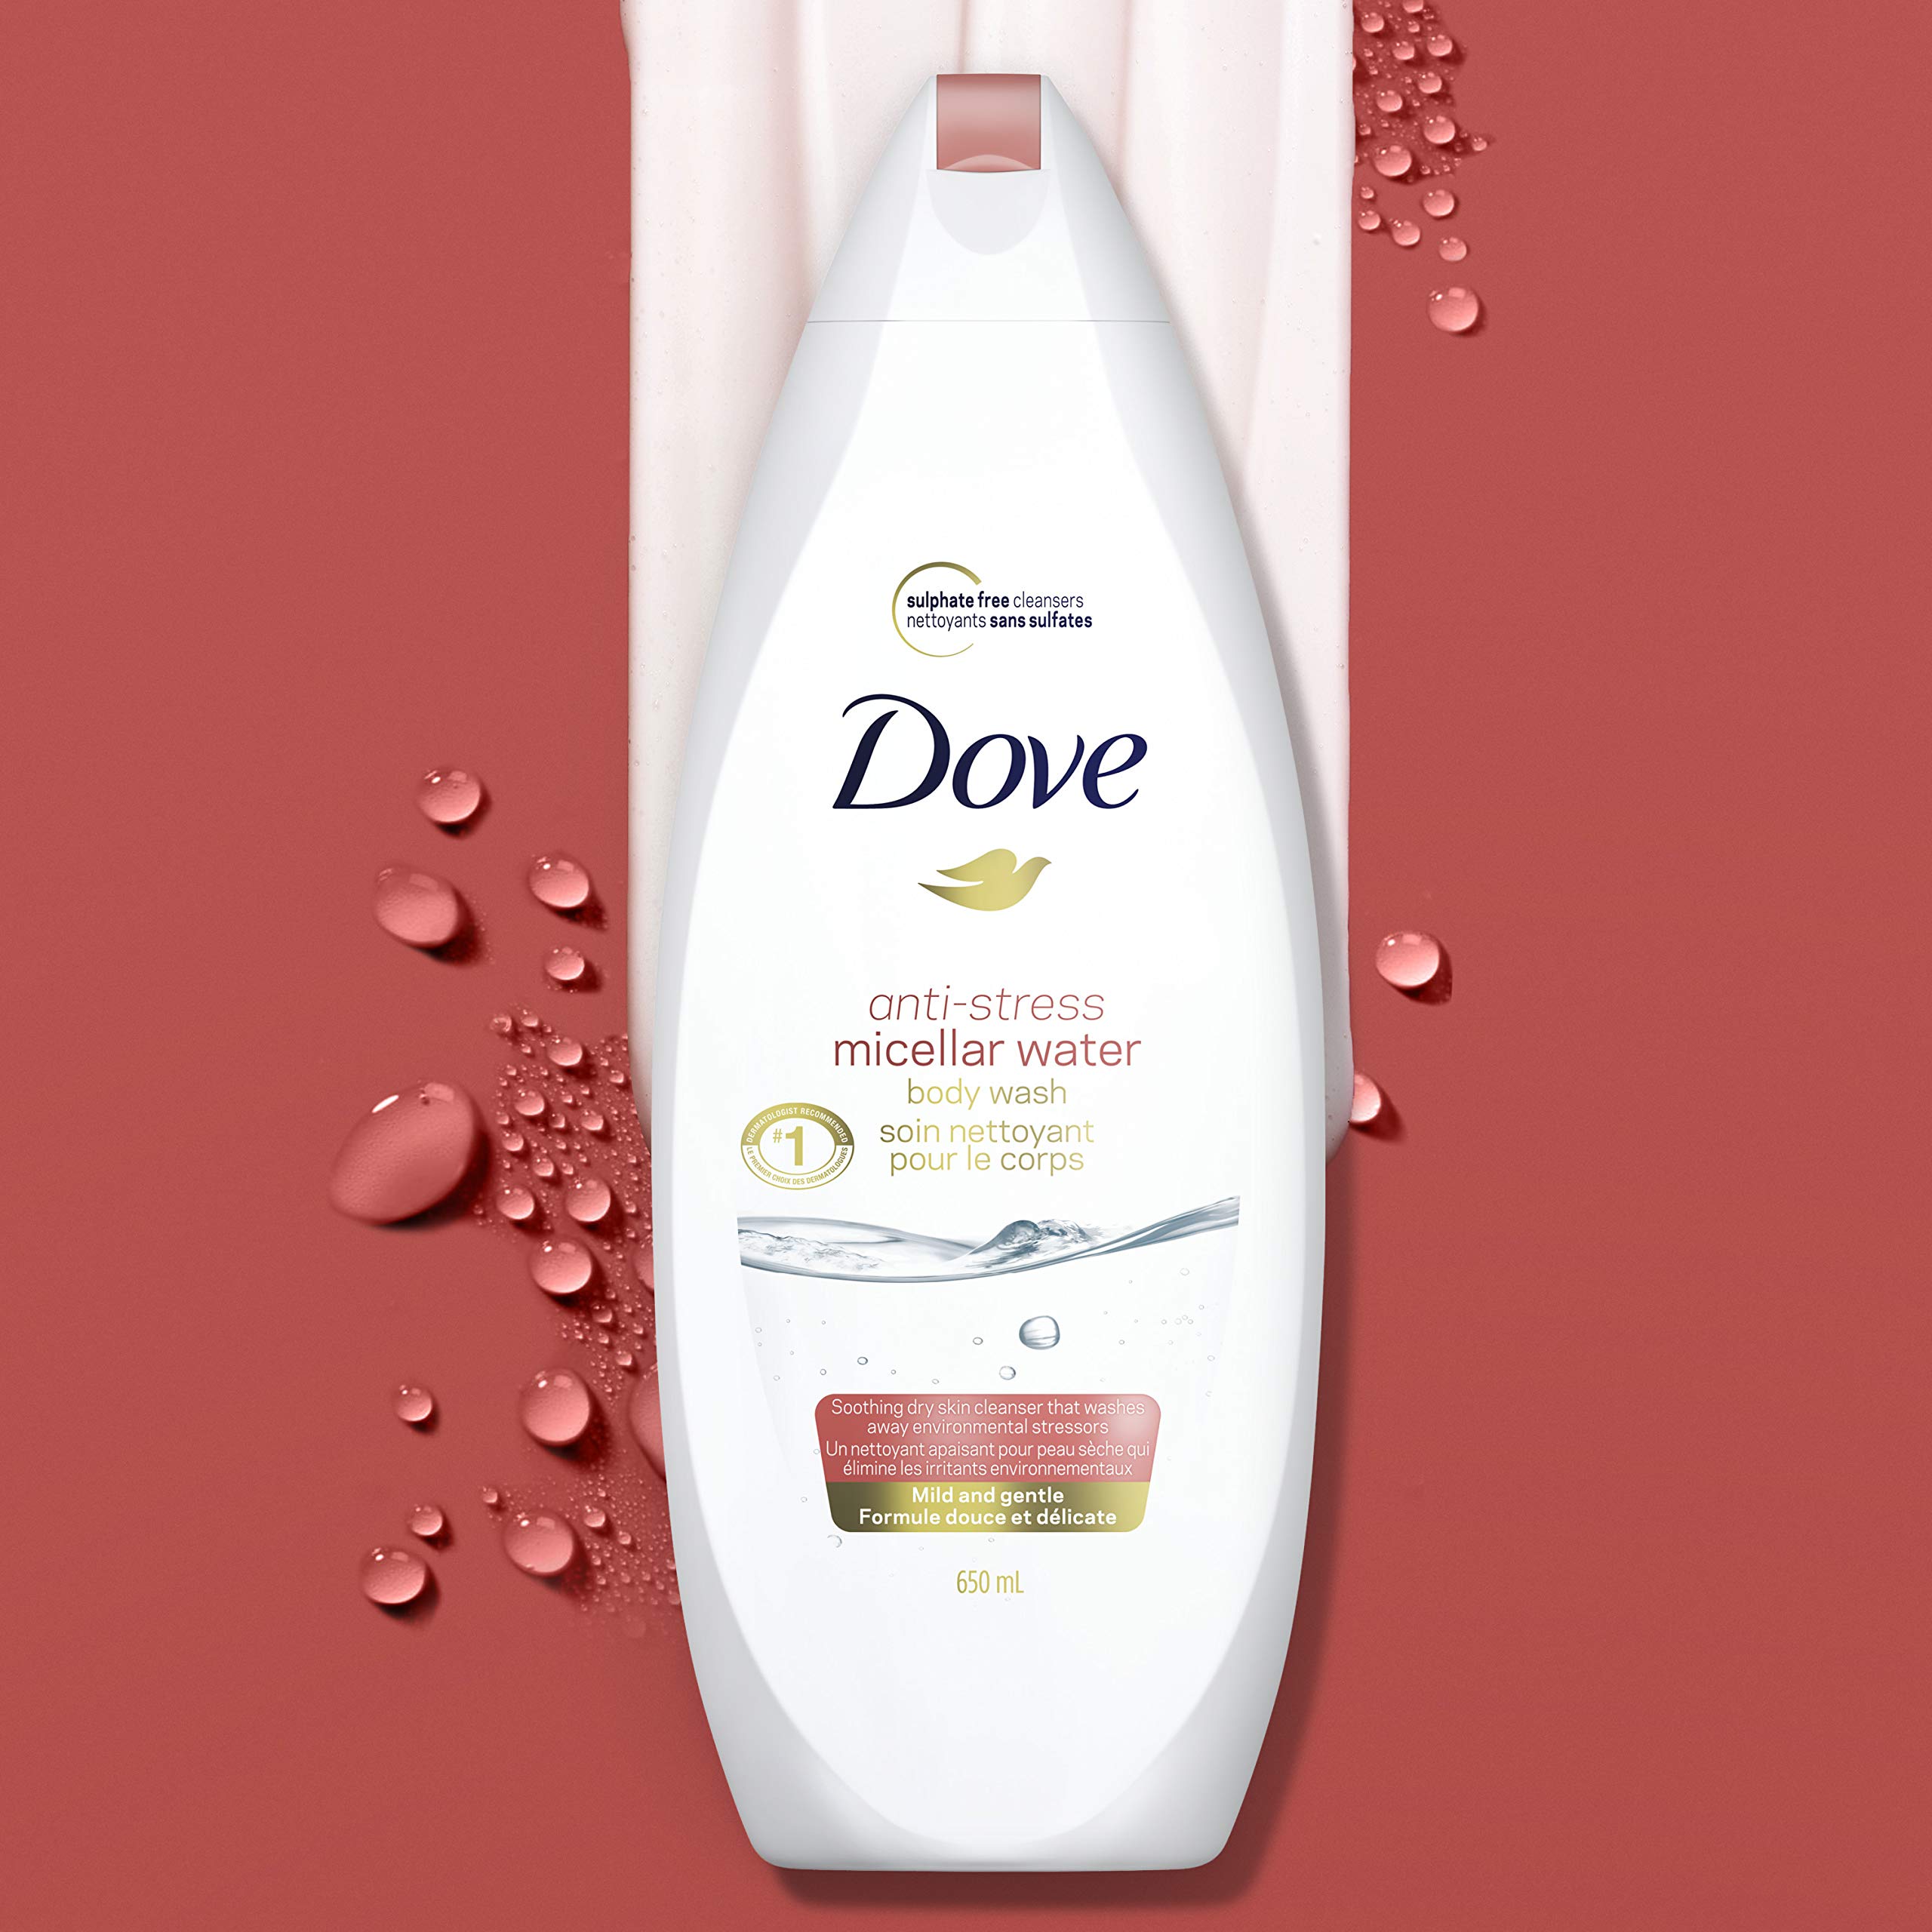 Dove Body Wash for Calming Sensitive Skin Micellar Anti Stress Cleanser That Effectively Washes Away Bacteria While Nourishing Your Skin 22 oz